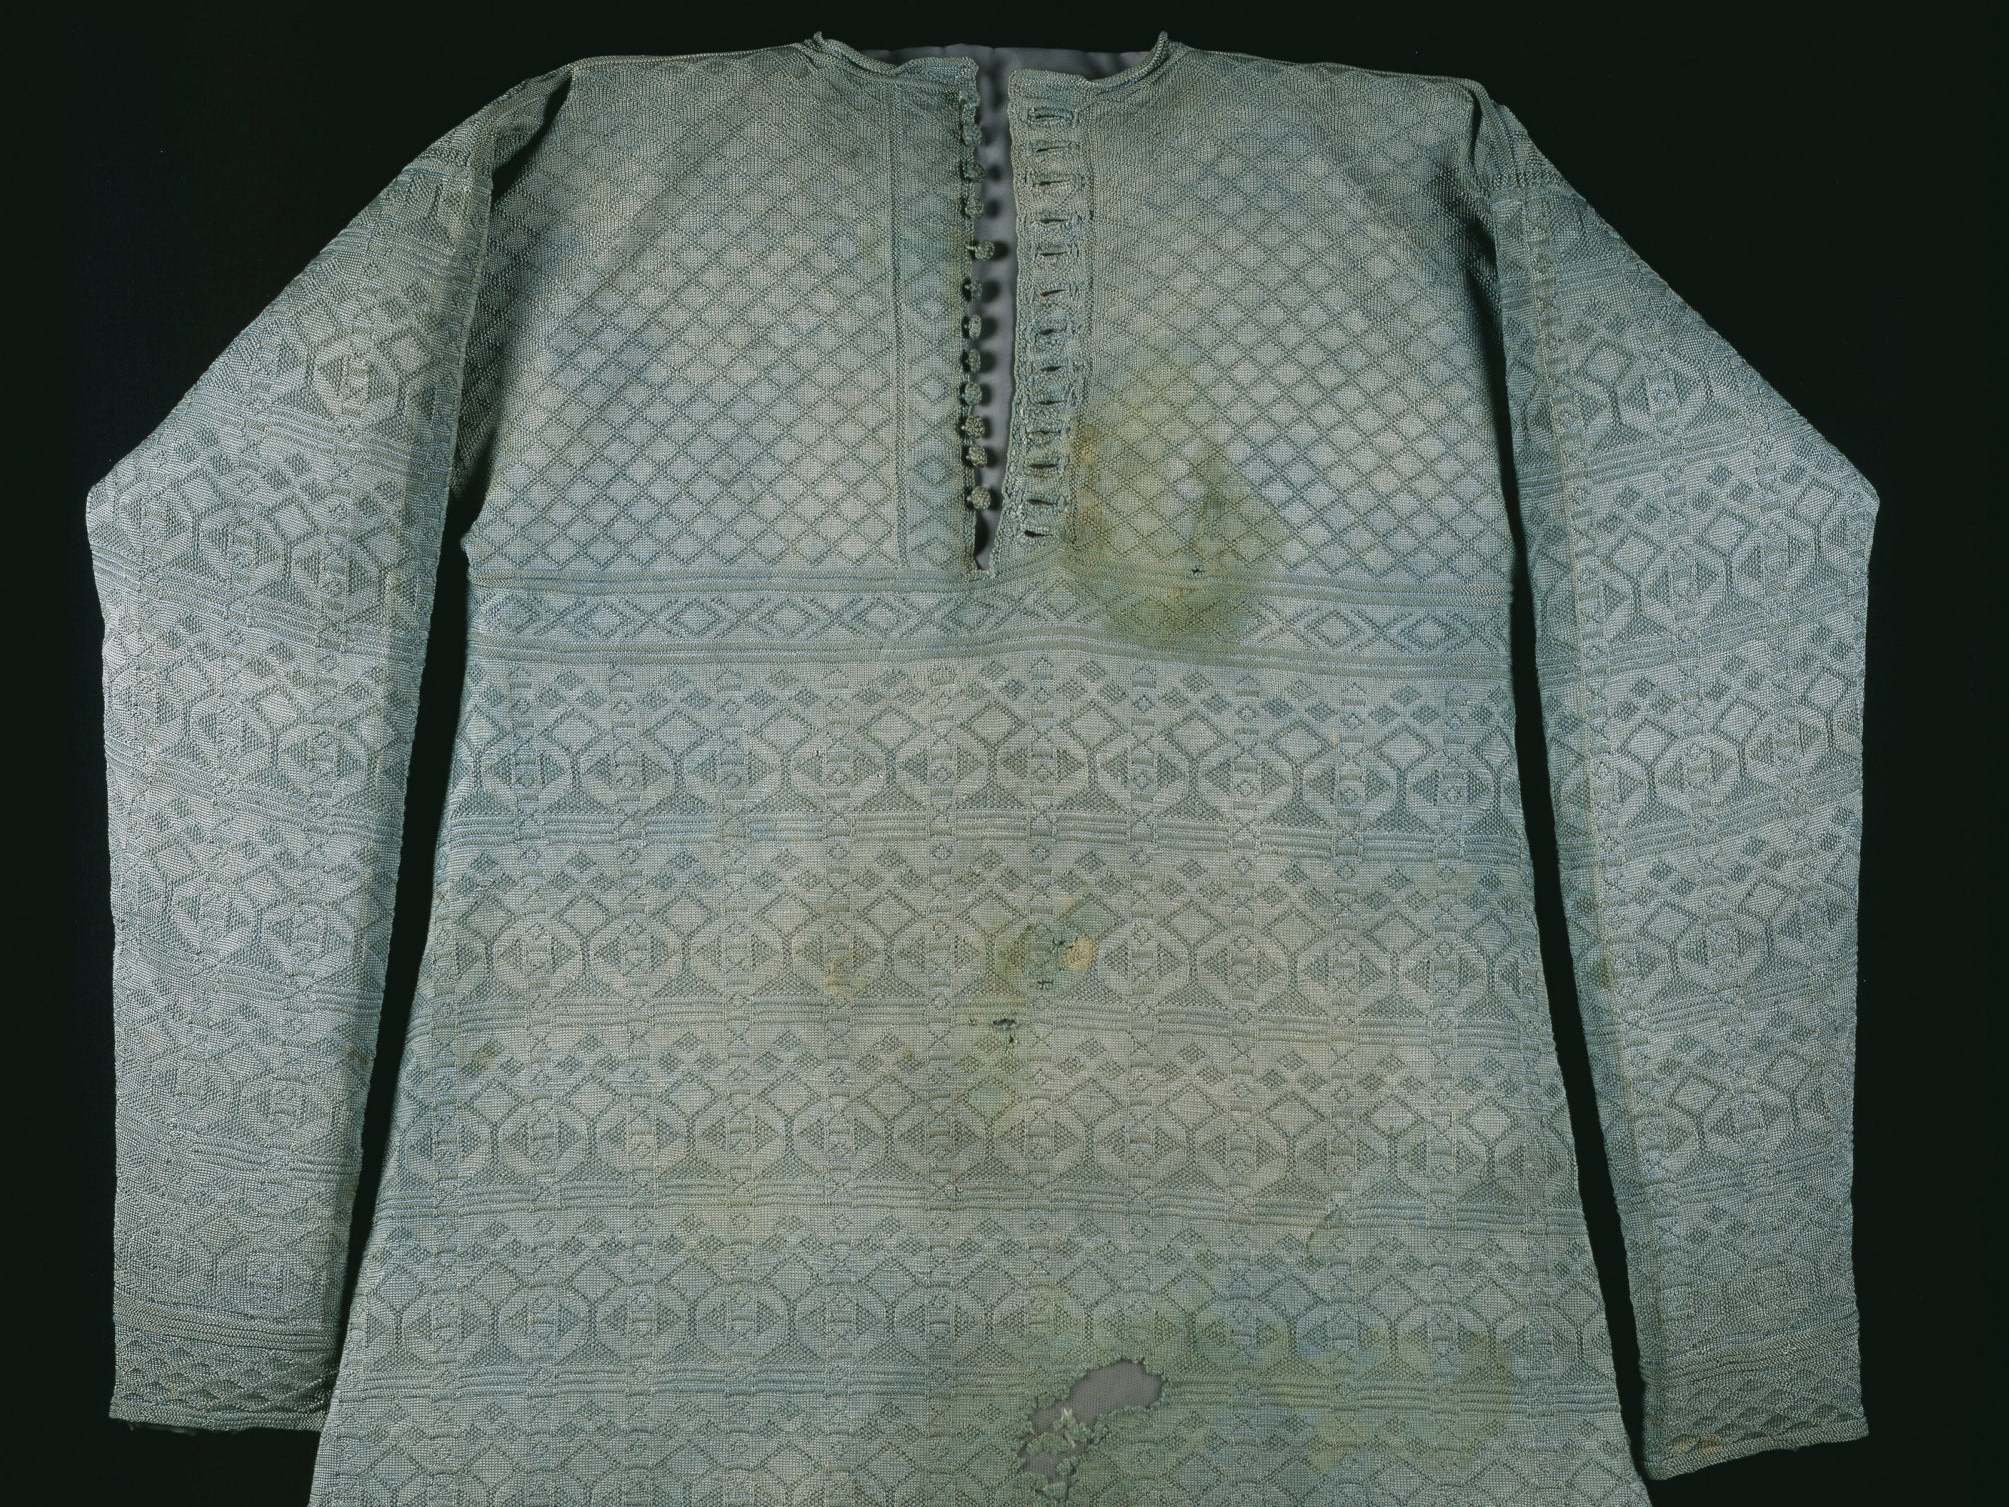 A knitted pale green silk vest or waistcoat said to have been worn by Charles I at his execution